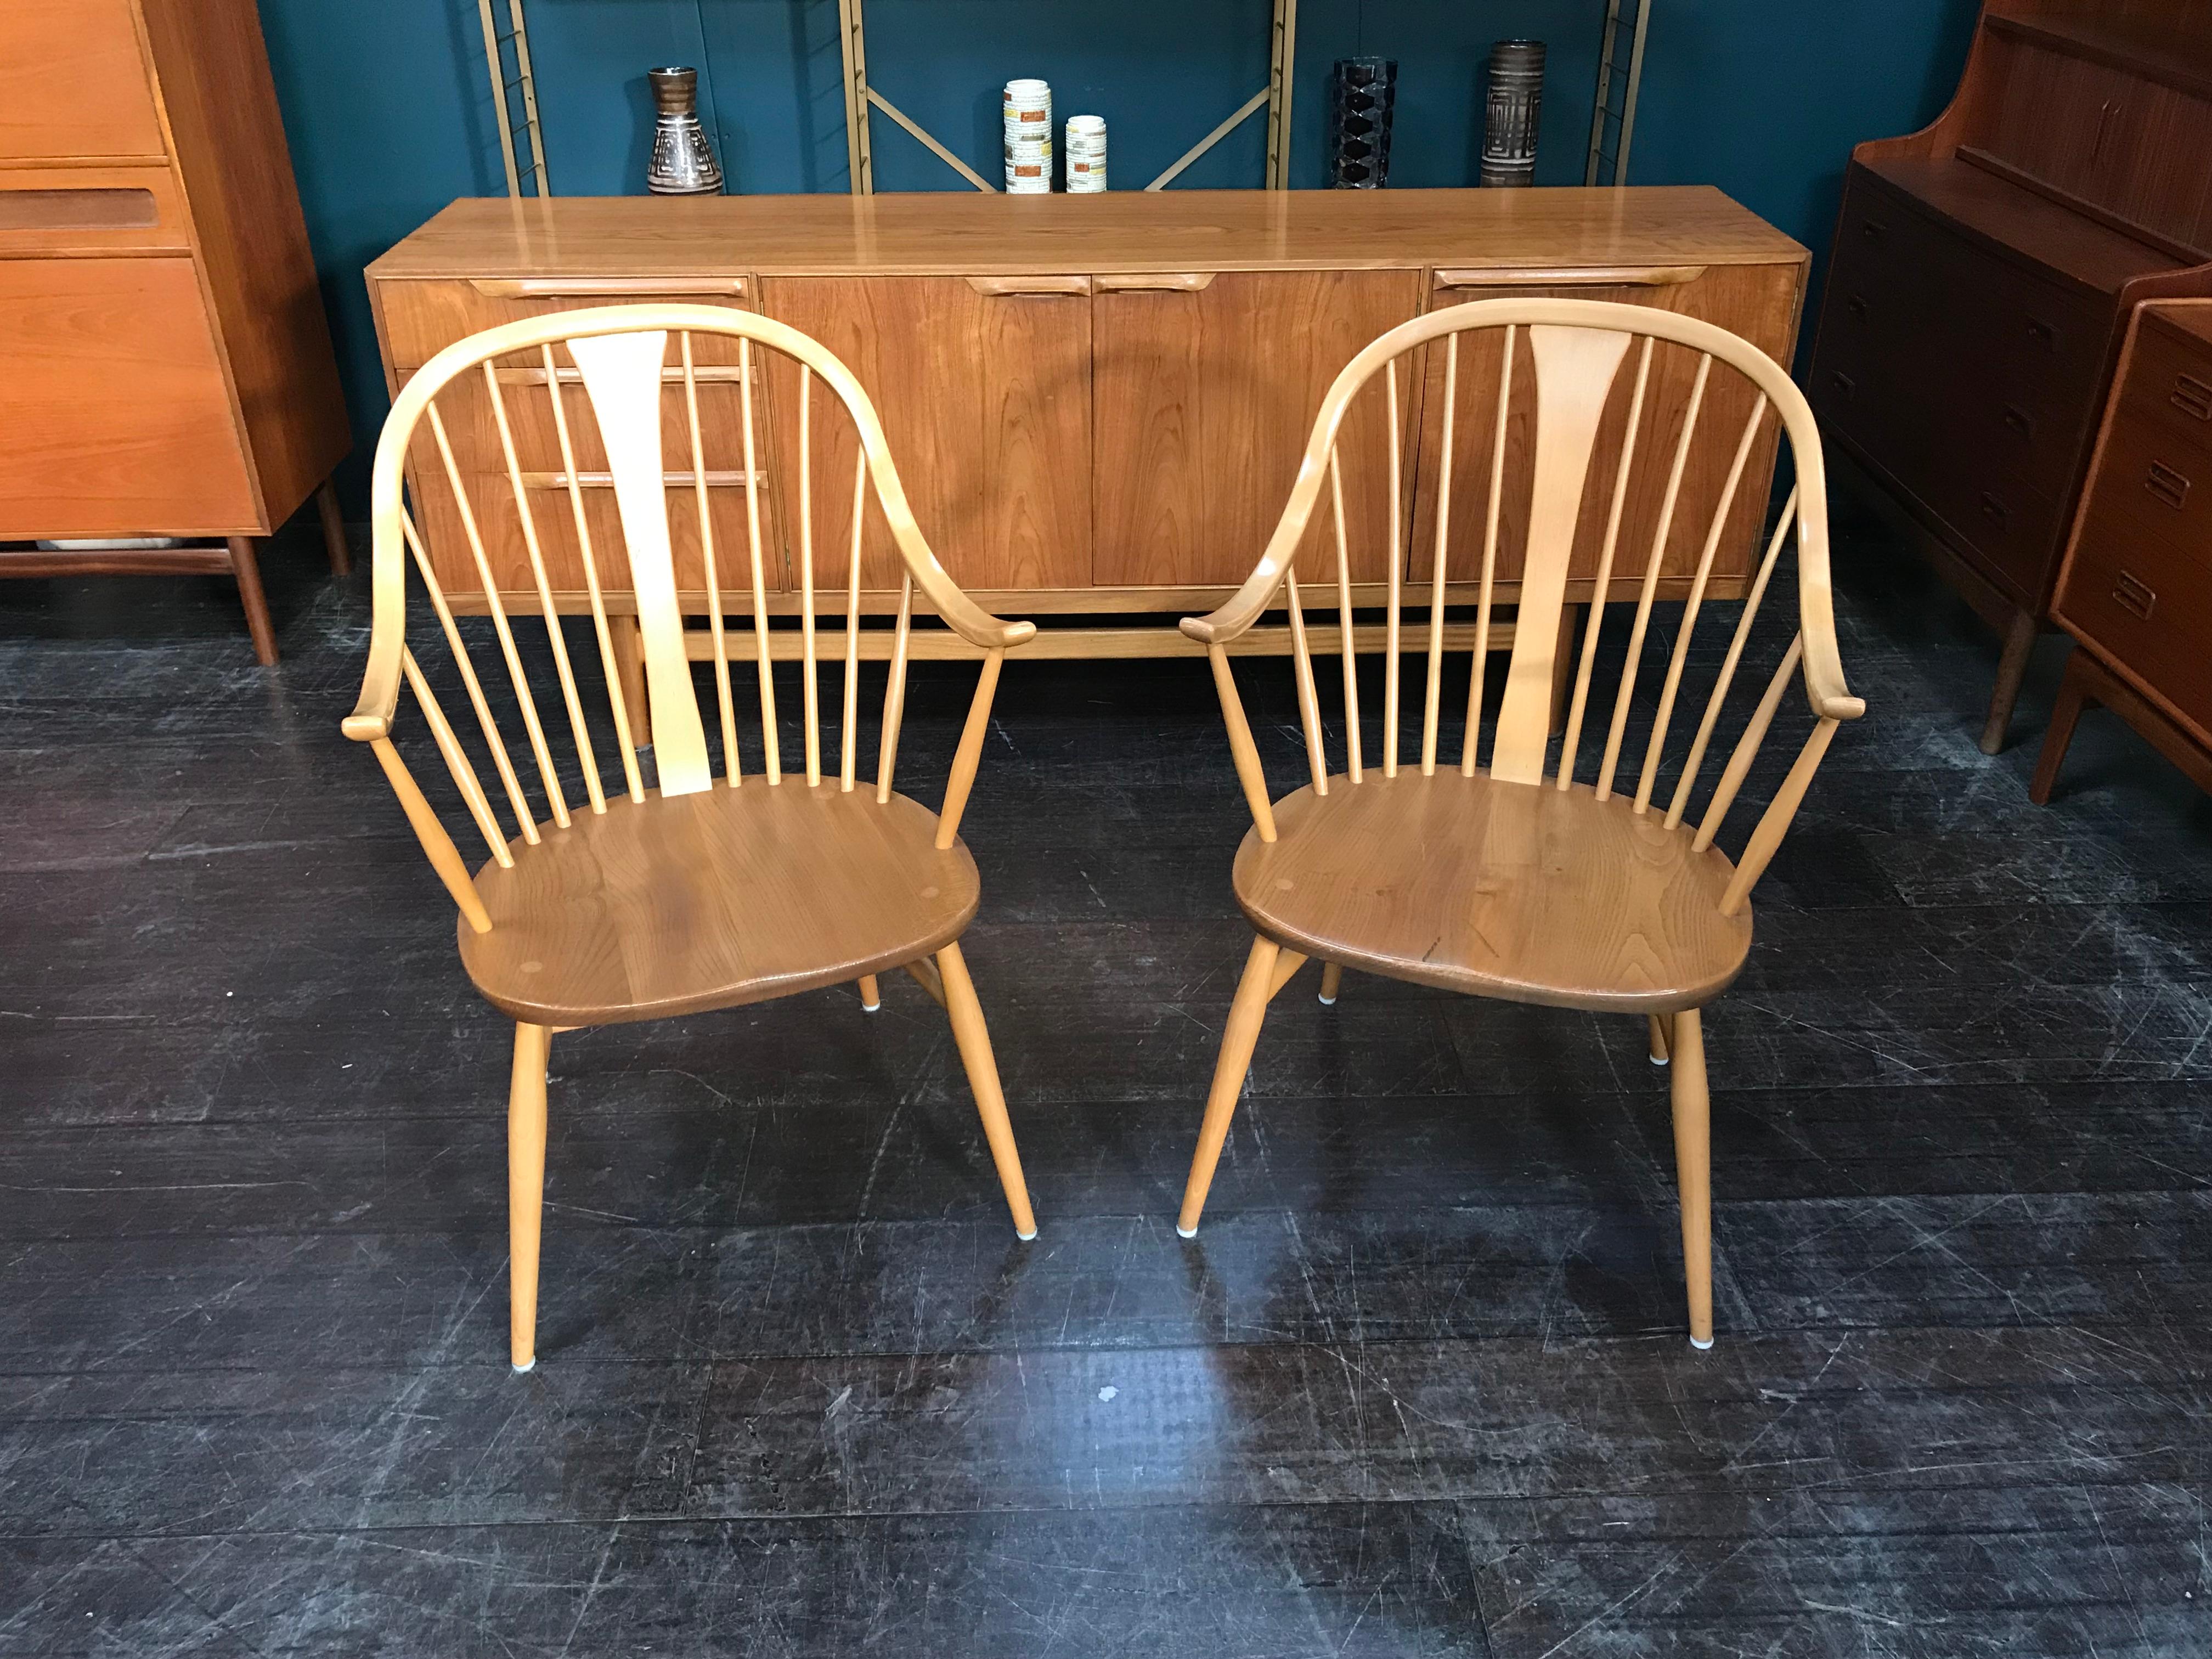 Two rare Ercol Cowhorn armchairs in sought-after light wood. Perfect for any living space, these beautiful chairs are made from solid elm and beech. They feature Ercol’s characteristic stick-back look, creating a greater sense of space and light.